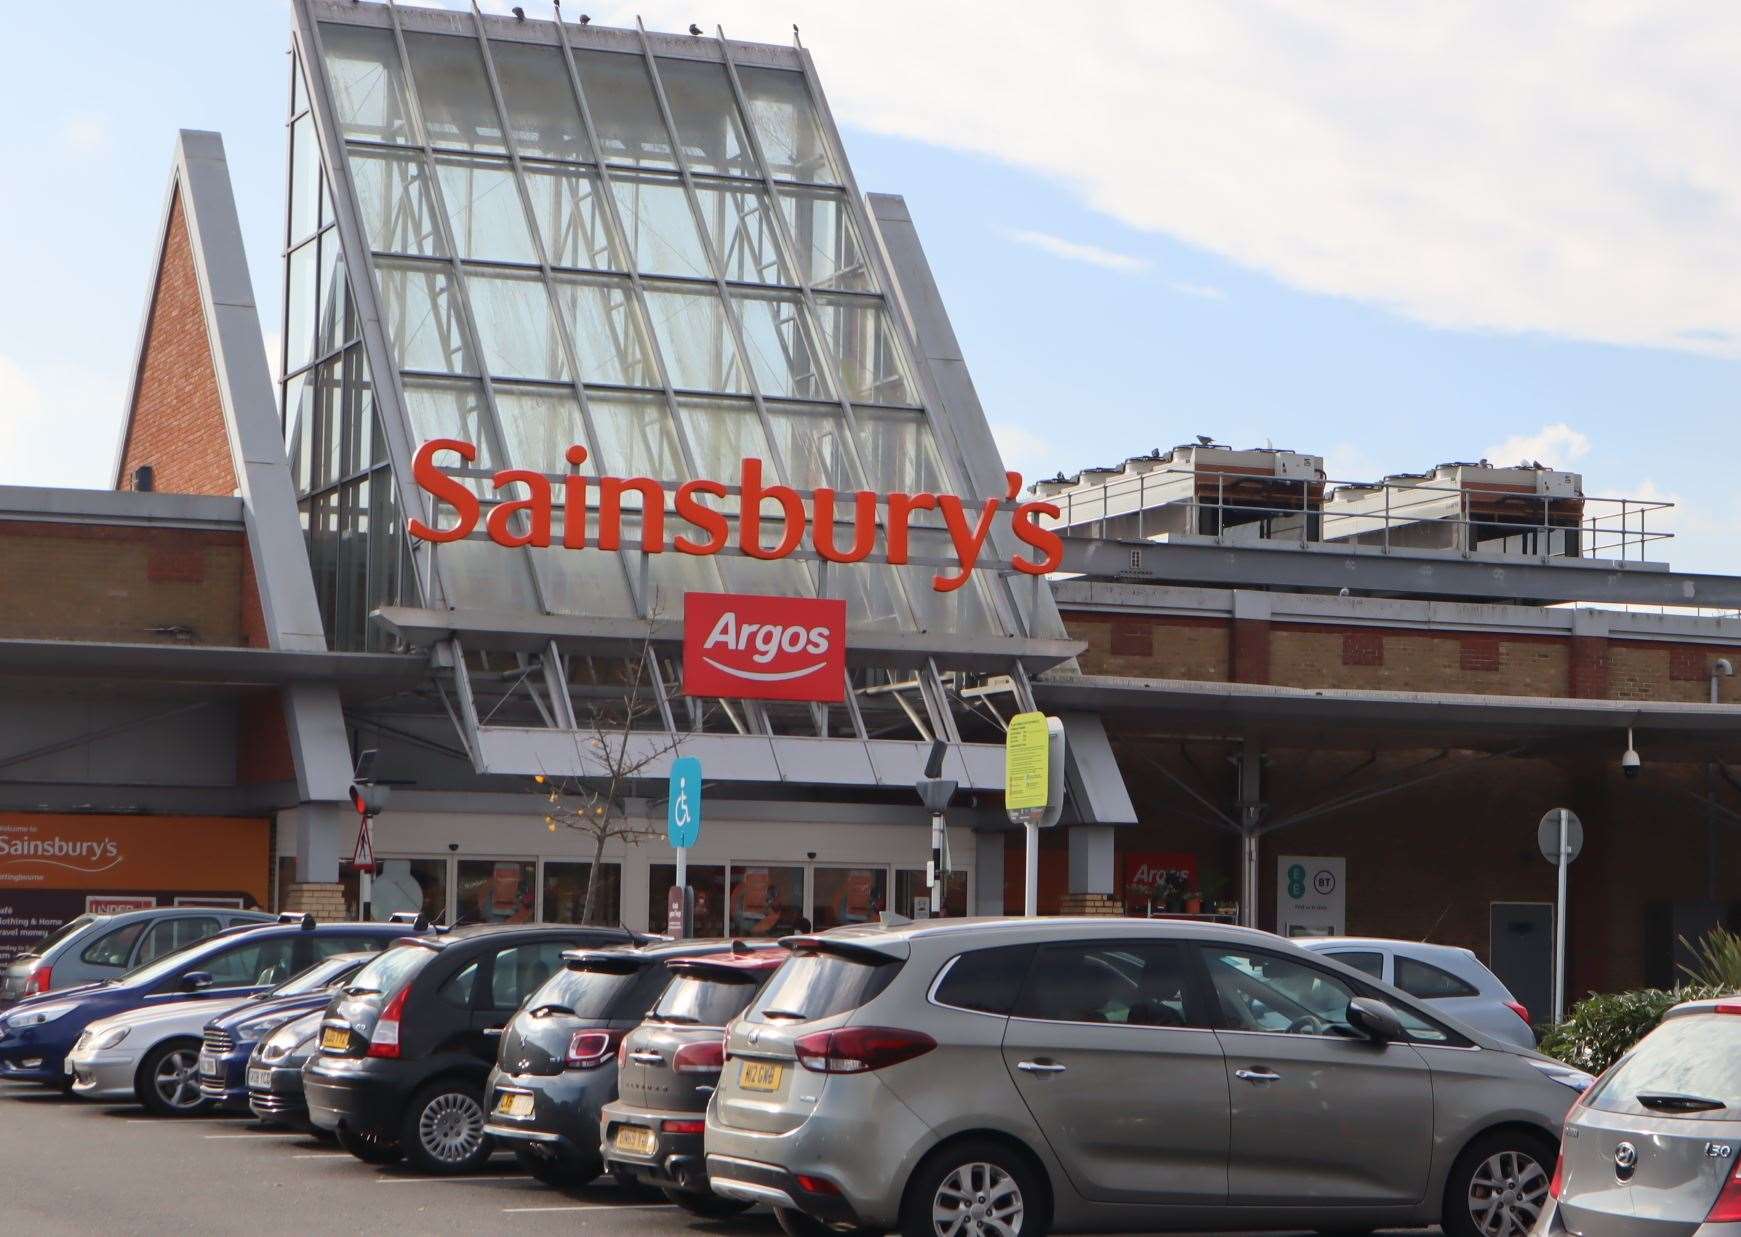 Sainsbury's supermarkets could be hit by any industrial action